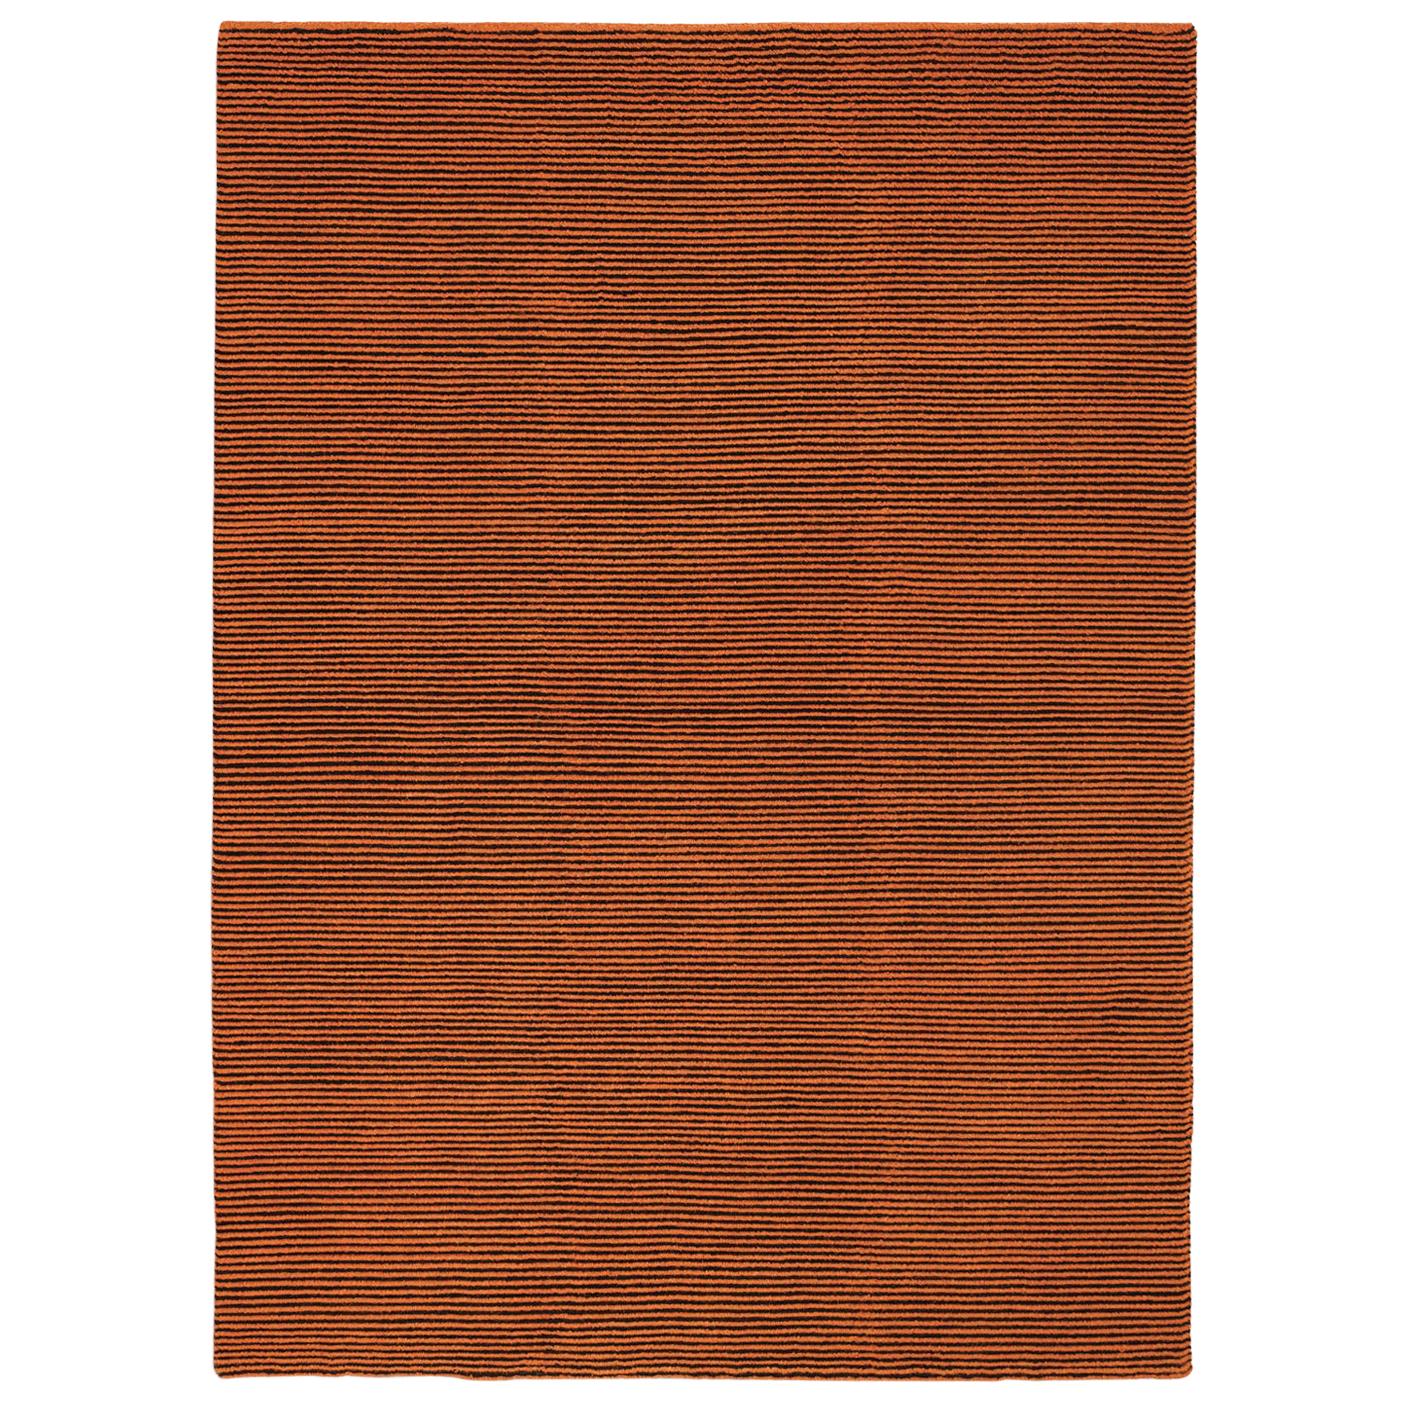 Contemporary Soft Natural Orange Pure Wool Rug by Deanna Comellini 170x240 cm For Sale